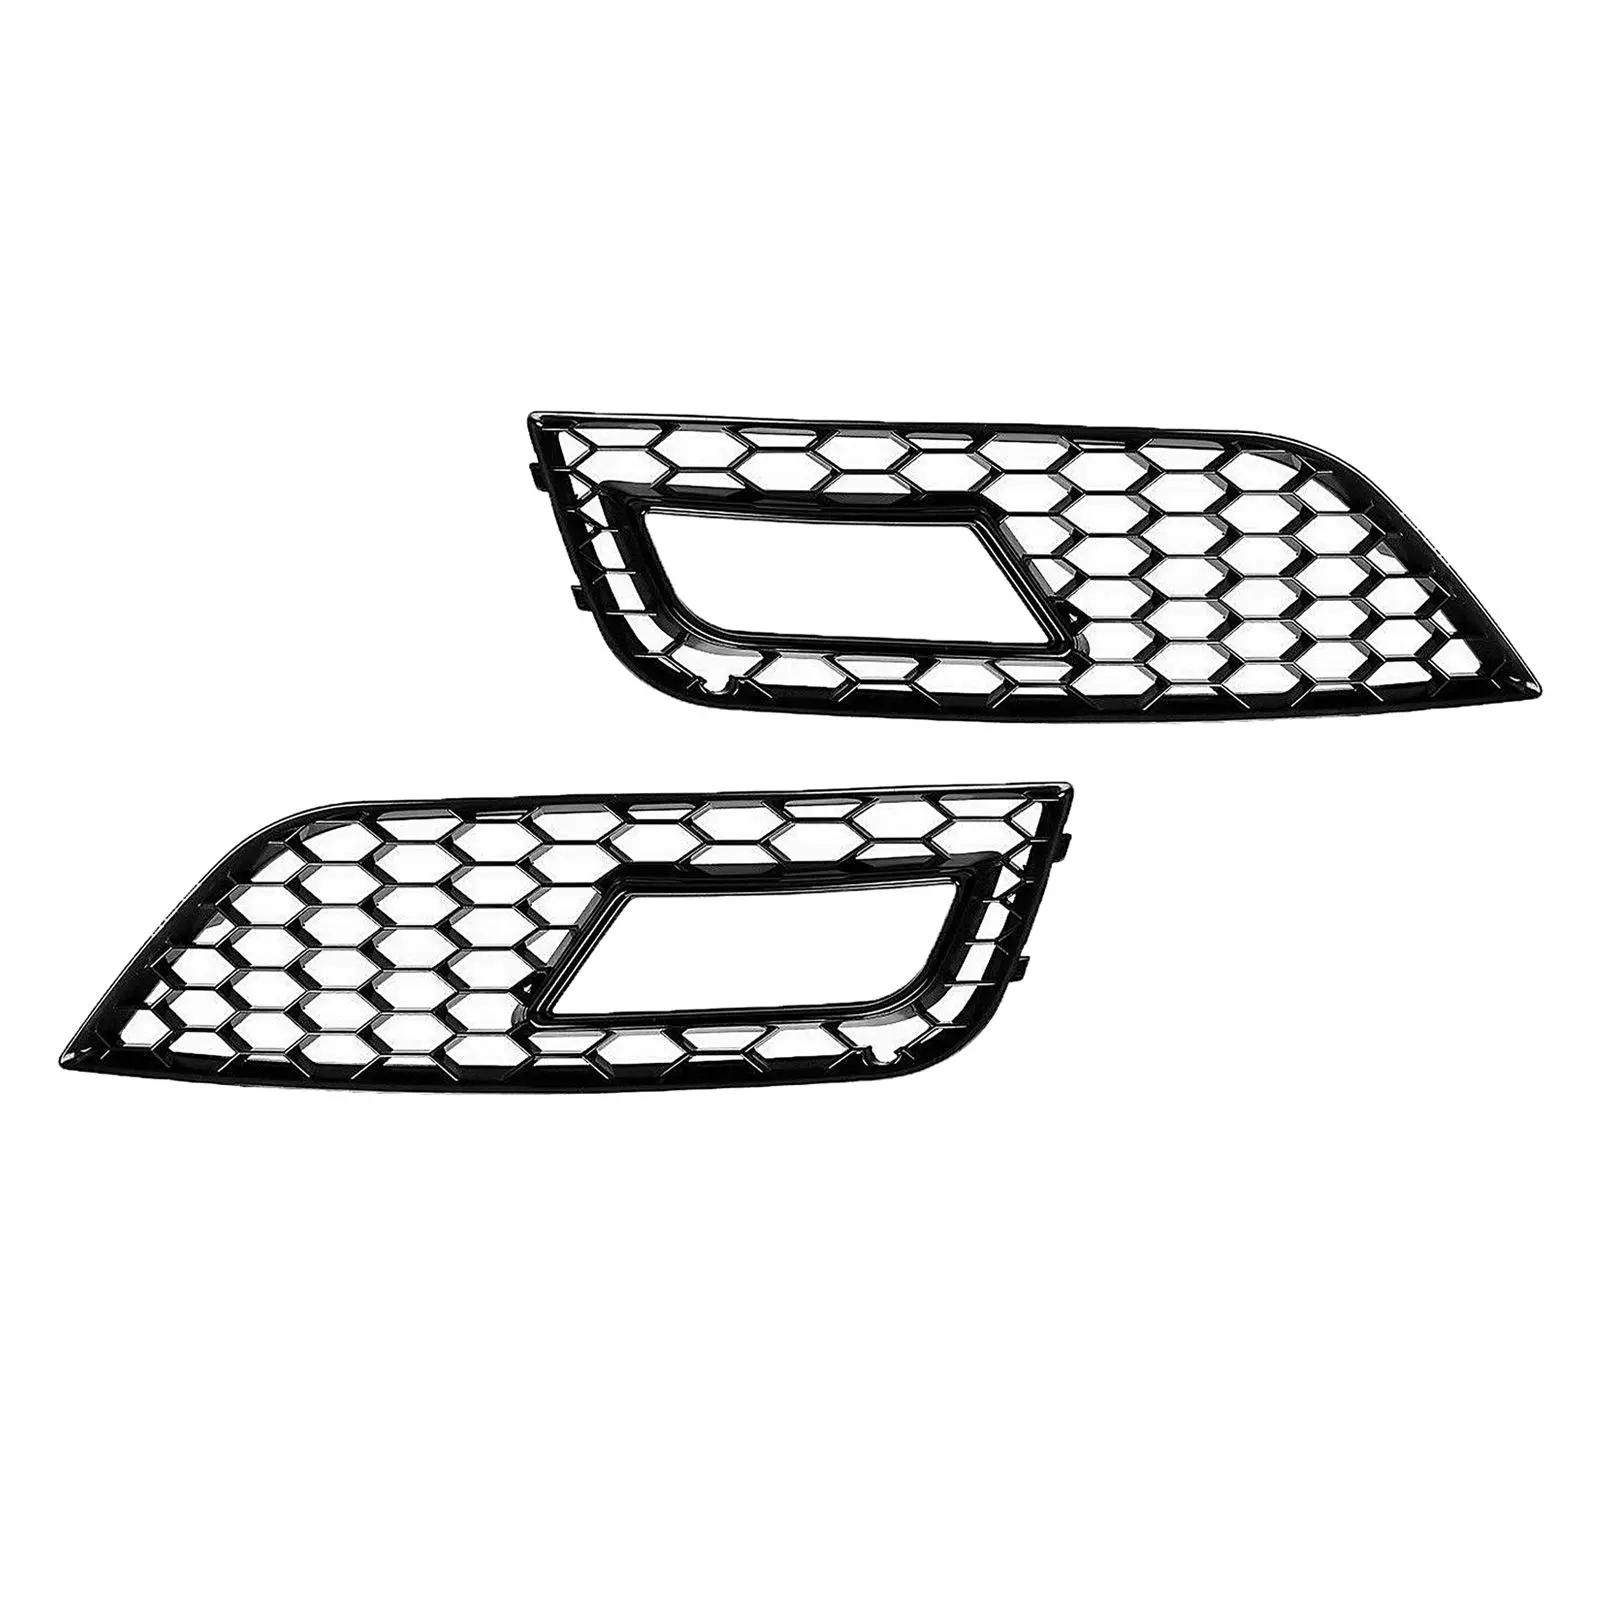  A4 B8.5 2013-2016 2-Piece Glossy Black Front Fog Light Grill, Durable